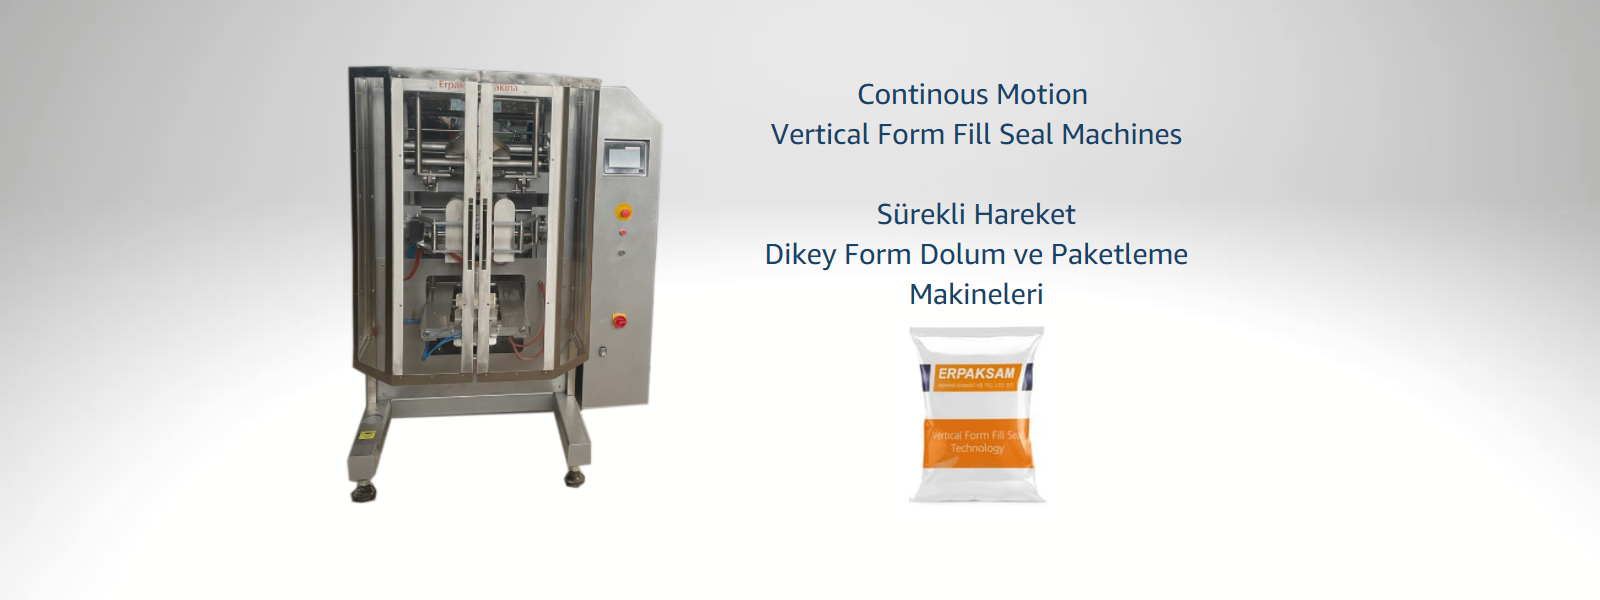 Continous Motion Vertical Form Fill Seal Machine